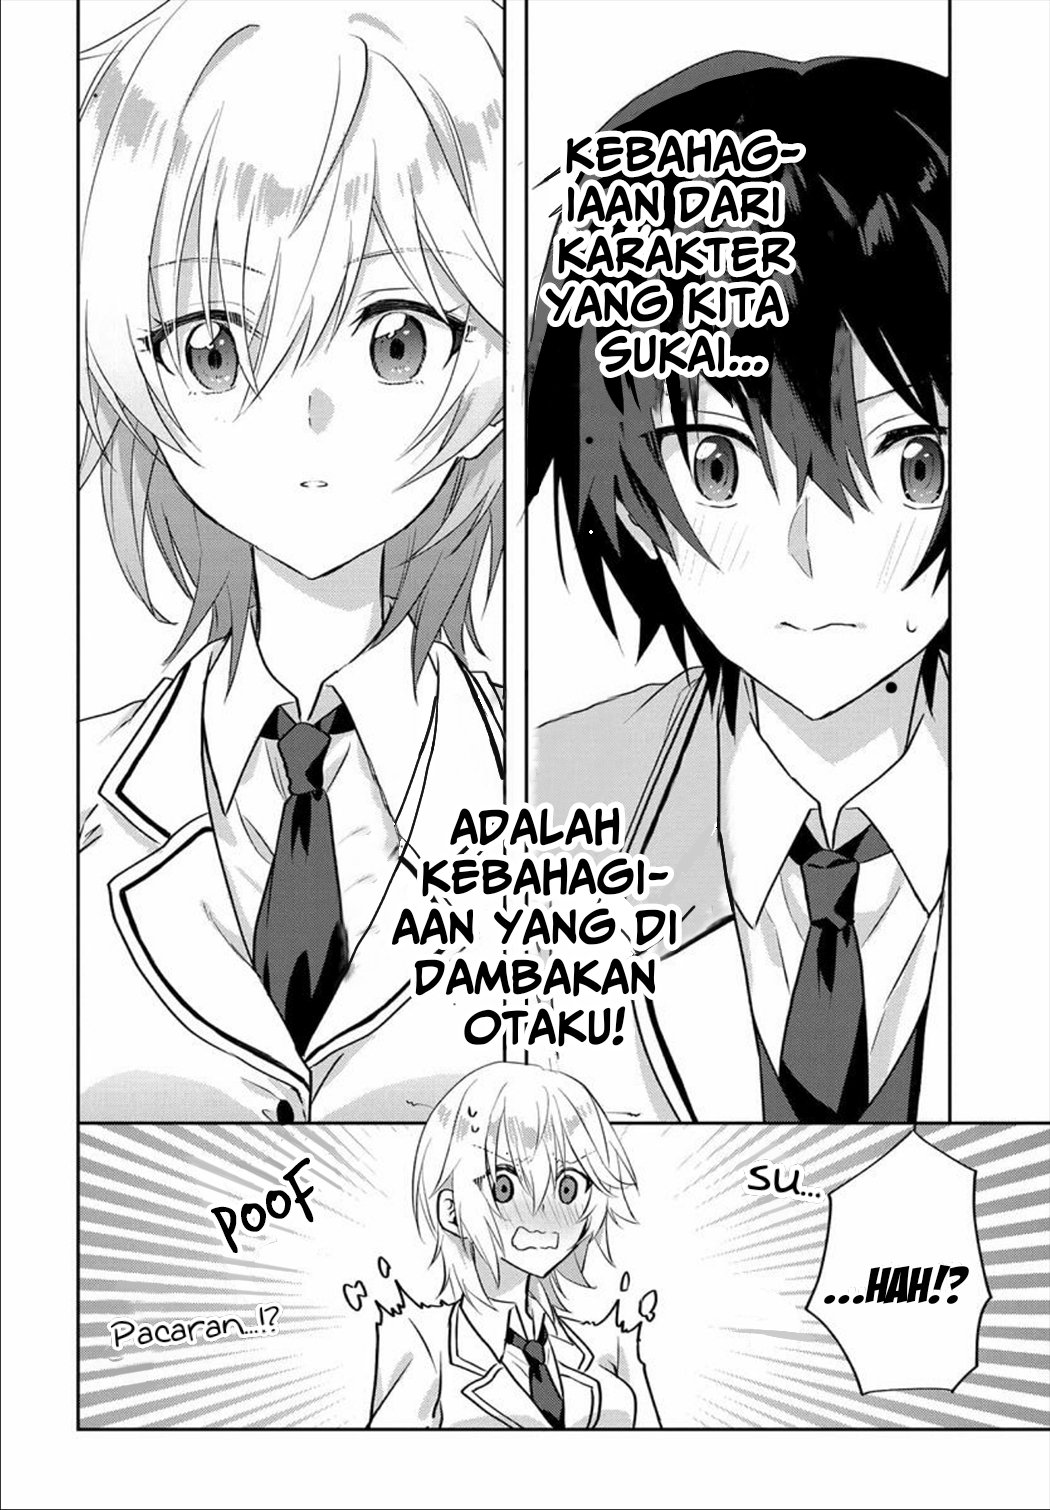 Since I'Ve Entered The World Of Romantic Comedy Manga, I'Ll Do My Best To Make The Losing Heroine Happy. Chapter 1 - 237